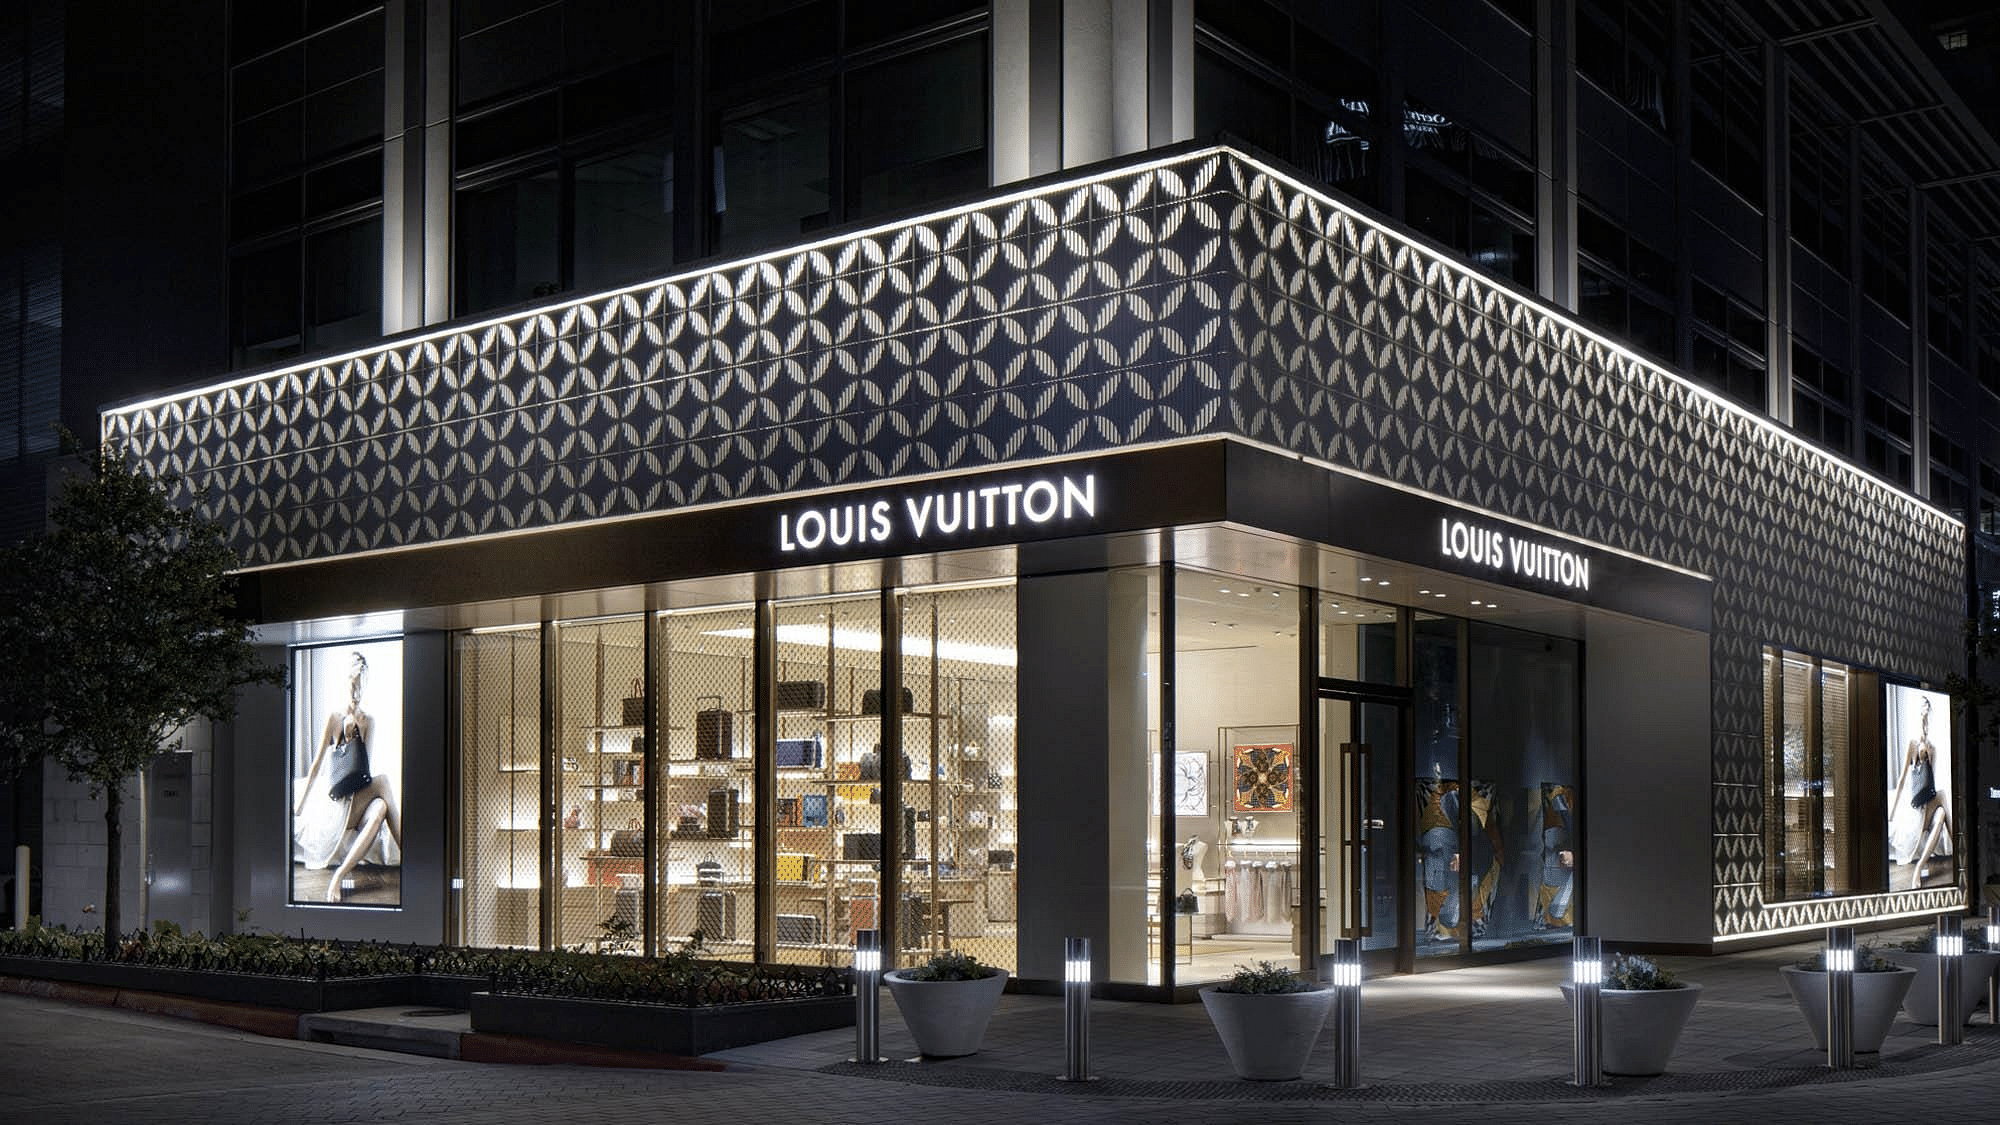 5 lesser-known facts about Louis Vuitton